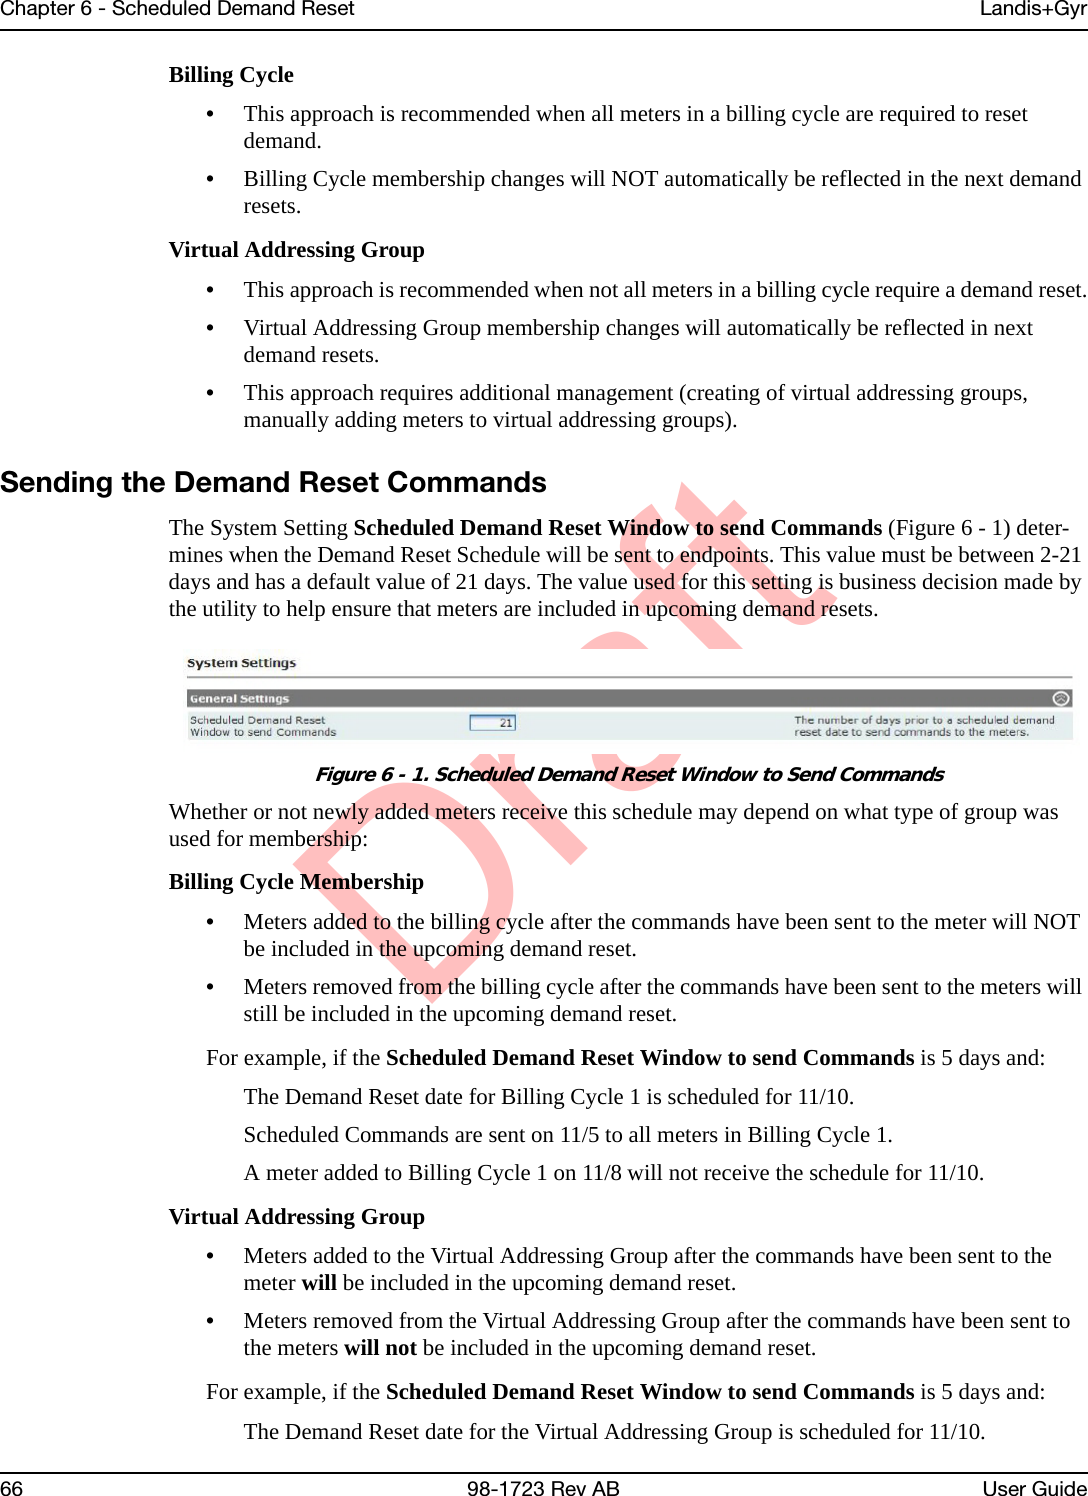 DraftChapter 6 - Scheduled Demand Reset Landis+Gyr66 98-1723 Rev AB User GuideBilling Cycle•This approach is recommended when all meters in a billing cycle are required to reset demand.•Billing Cycle membership changes will NOT automatically be reflected in the next demand resets. Virtual Addressing Group•This approach is recommended when not all meters in a billing cycle require a demand reset.•Virtual Addressing Group membership changes will automatically be reflected in next demand resets.•This approach requires additional management (creating of virtual addressing groups, manually adding meters to virtual addressing groups).Sending the Demand Reset CommandsThe System Setting Scheduled Demand Reset Window to send Commands (Figure 6 - 1) deter-mines when the Demand Reset Schedule will be sent to endpoints. This value must be between 2-21 days and has a default value of 21 days. The value used for this setting is business decision made by the utility to help ensure that meters are included in upcoming demand resets. Figure 6 - 1. Scheduled Demand Reset Window to Send CommandsWhether or not newly added meters receive this schedule may depend on what type of group was used for membership:Billing Cycle Membership•Meters added to the billing cycle after the commands have been sent to the meter will NOT be included in the upcoming demand reset.•Meters removed from the billing cycle after the commands have been sent to the meters will still be included in the upcoming demand reset.For example, if the Scheduled Demand Reset Window to send Commands is 5 days and:The Demand Reset date for Billing Cycle 1 is scheduled for 11/10.Scheduled Commands are sent on 11/5 to all meters in Billing Cycle 1.A meter added to Billing Cycle 1 on 11/8 will not receive the schedule for 11/10.Virtual Addressing Group•Meters added to the Virtual Addressing Group after the commands have been sent to the meter will be included in the upcoming demand reset.•Meters removed from the Virtual Addressing Group after the commands have been sent to the meters will not be included in the upcoming demand reset.For example, if the Scheduled Demand Reset Window to send Commands is 5 days and:The Demand Reset date for the Virtual Addressing Group is scheduled for 11/10.